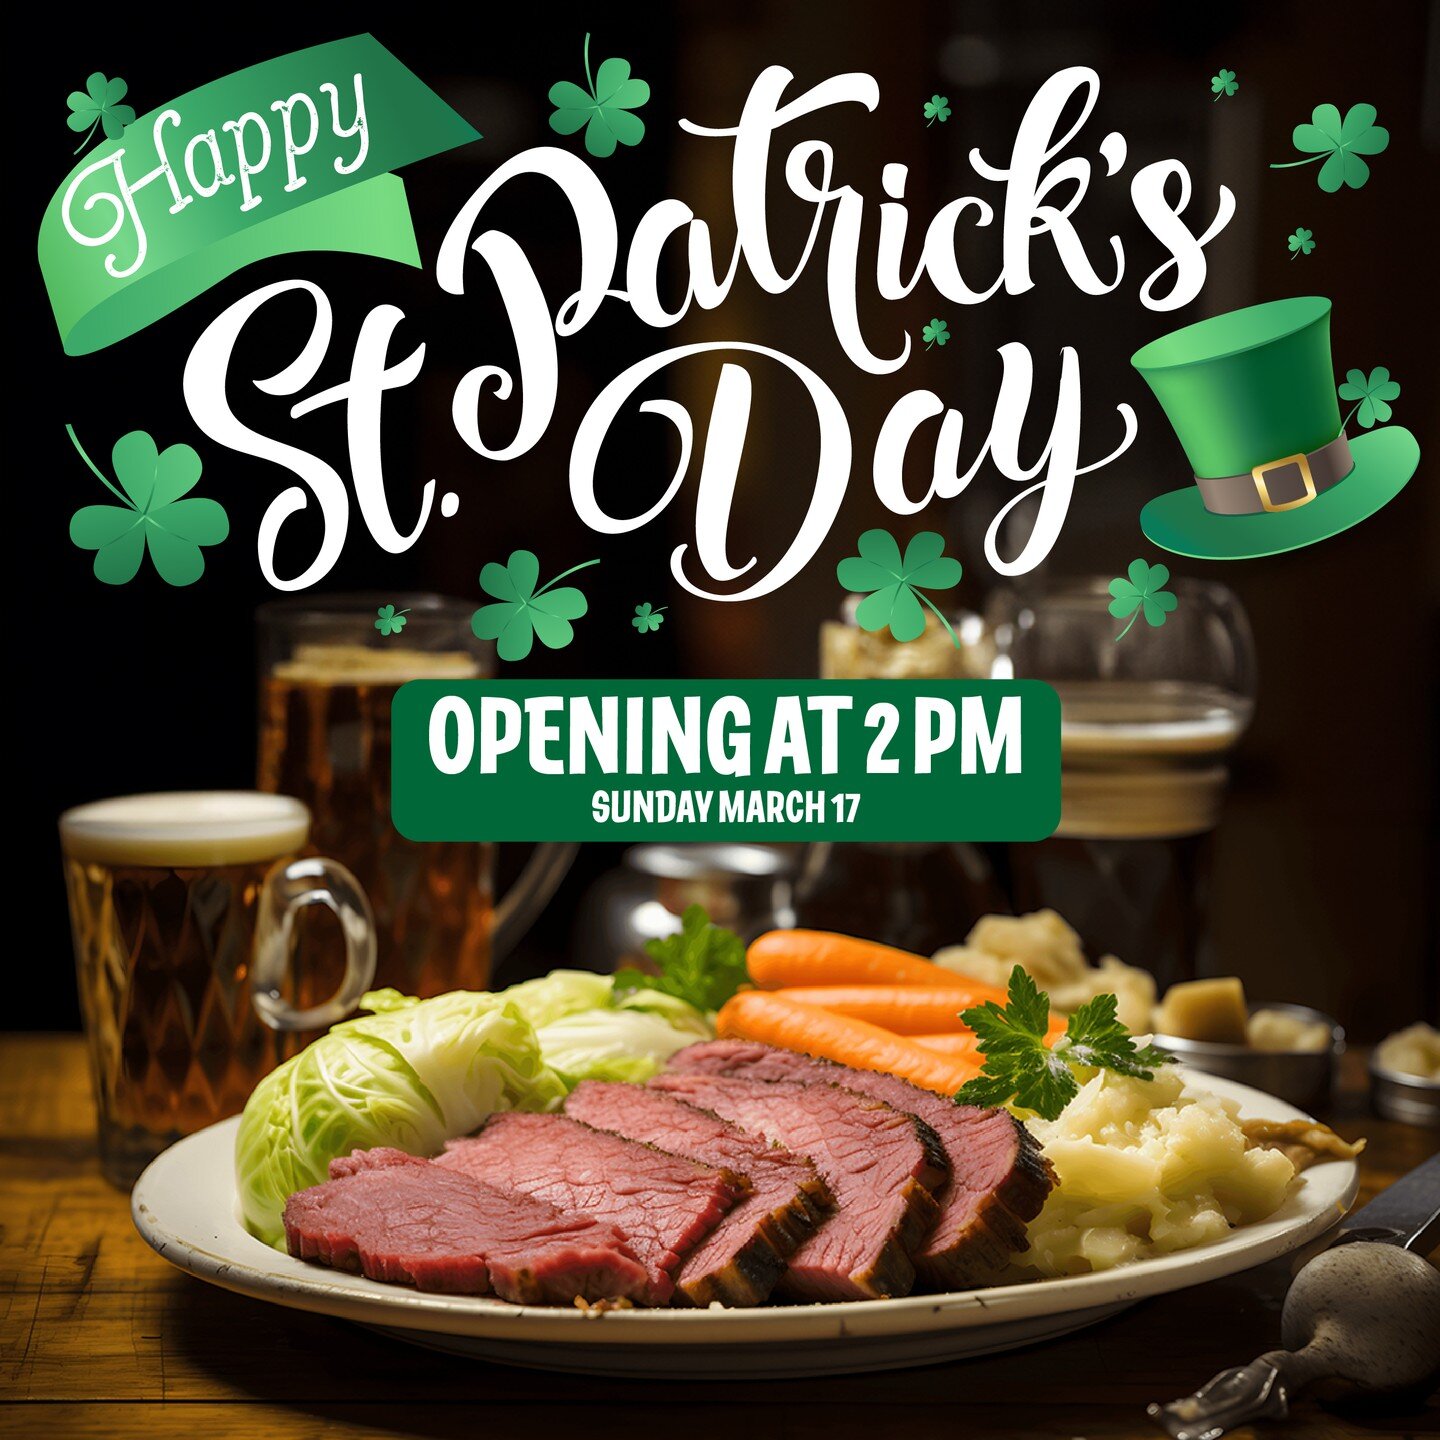 ☘️🎉 Happy St. Patrick's Day! 🍀🎶

Join us today for a celebration like no other! We have some fantastic entertainment and mouth-watering food specials lined up just for you. Groovestone will kick off the festivities at 4 pm, with the talented Tom B